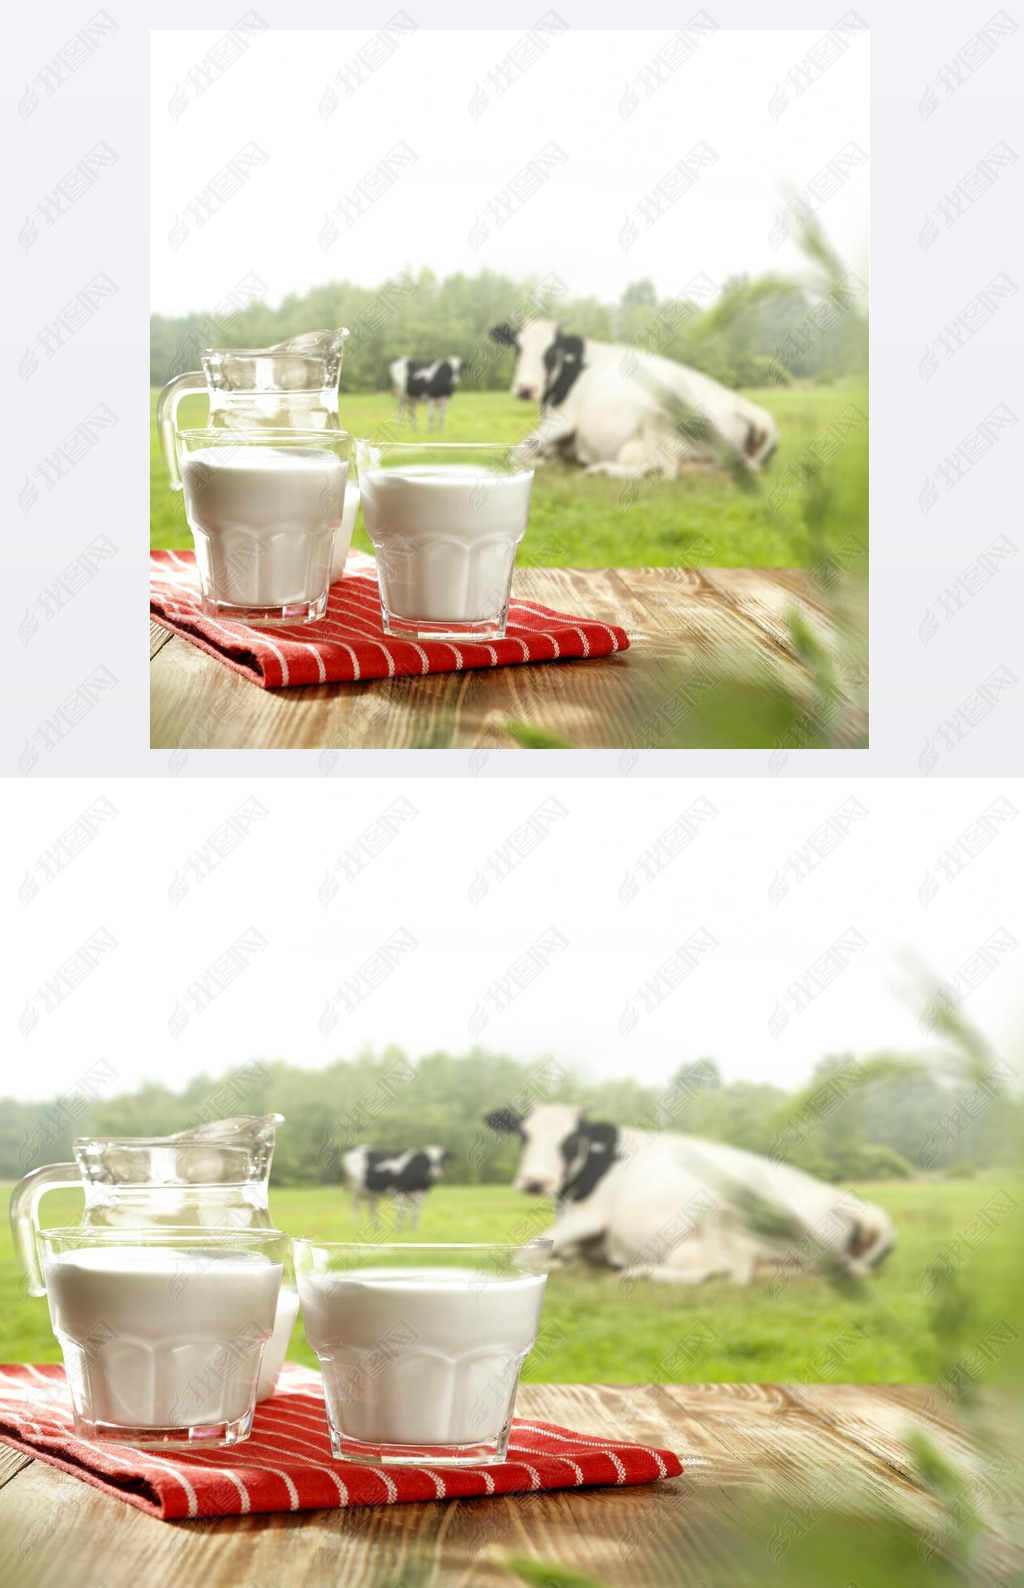 Morning time with rural landscape of cow and milk on table place. 